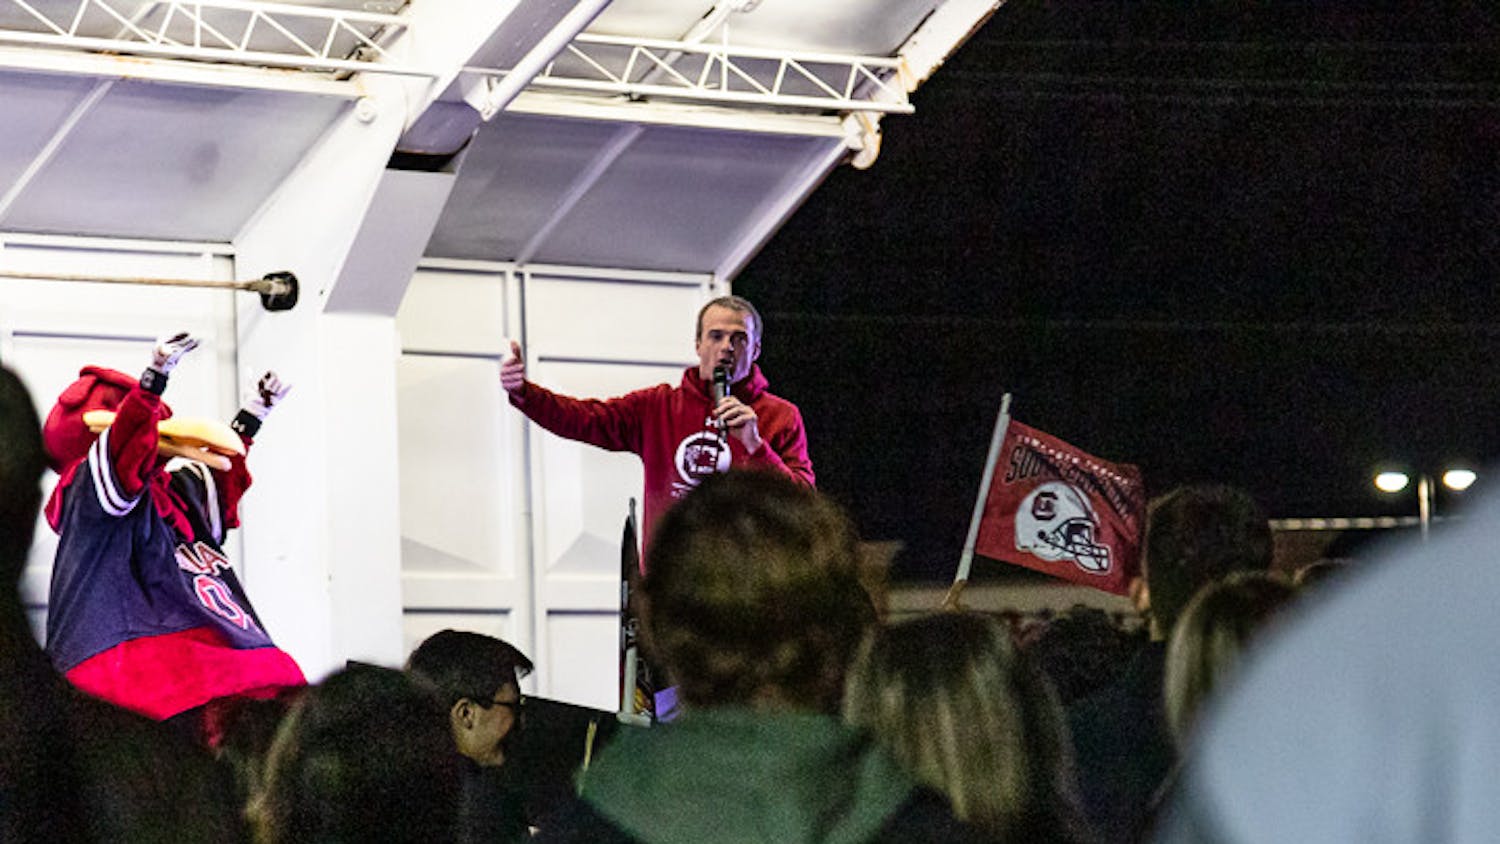 USC football head coach Shane Beamer was the special guest at the annual tiger burn event on Nov. 21, 2022. UofSC students watched proudly as Beamer riled up the crowd to signal the start of the annual Tiger Burn 
ceremony.